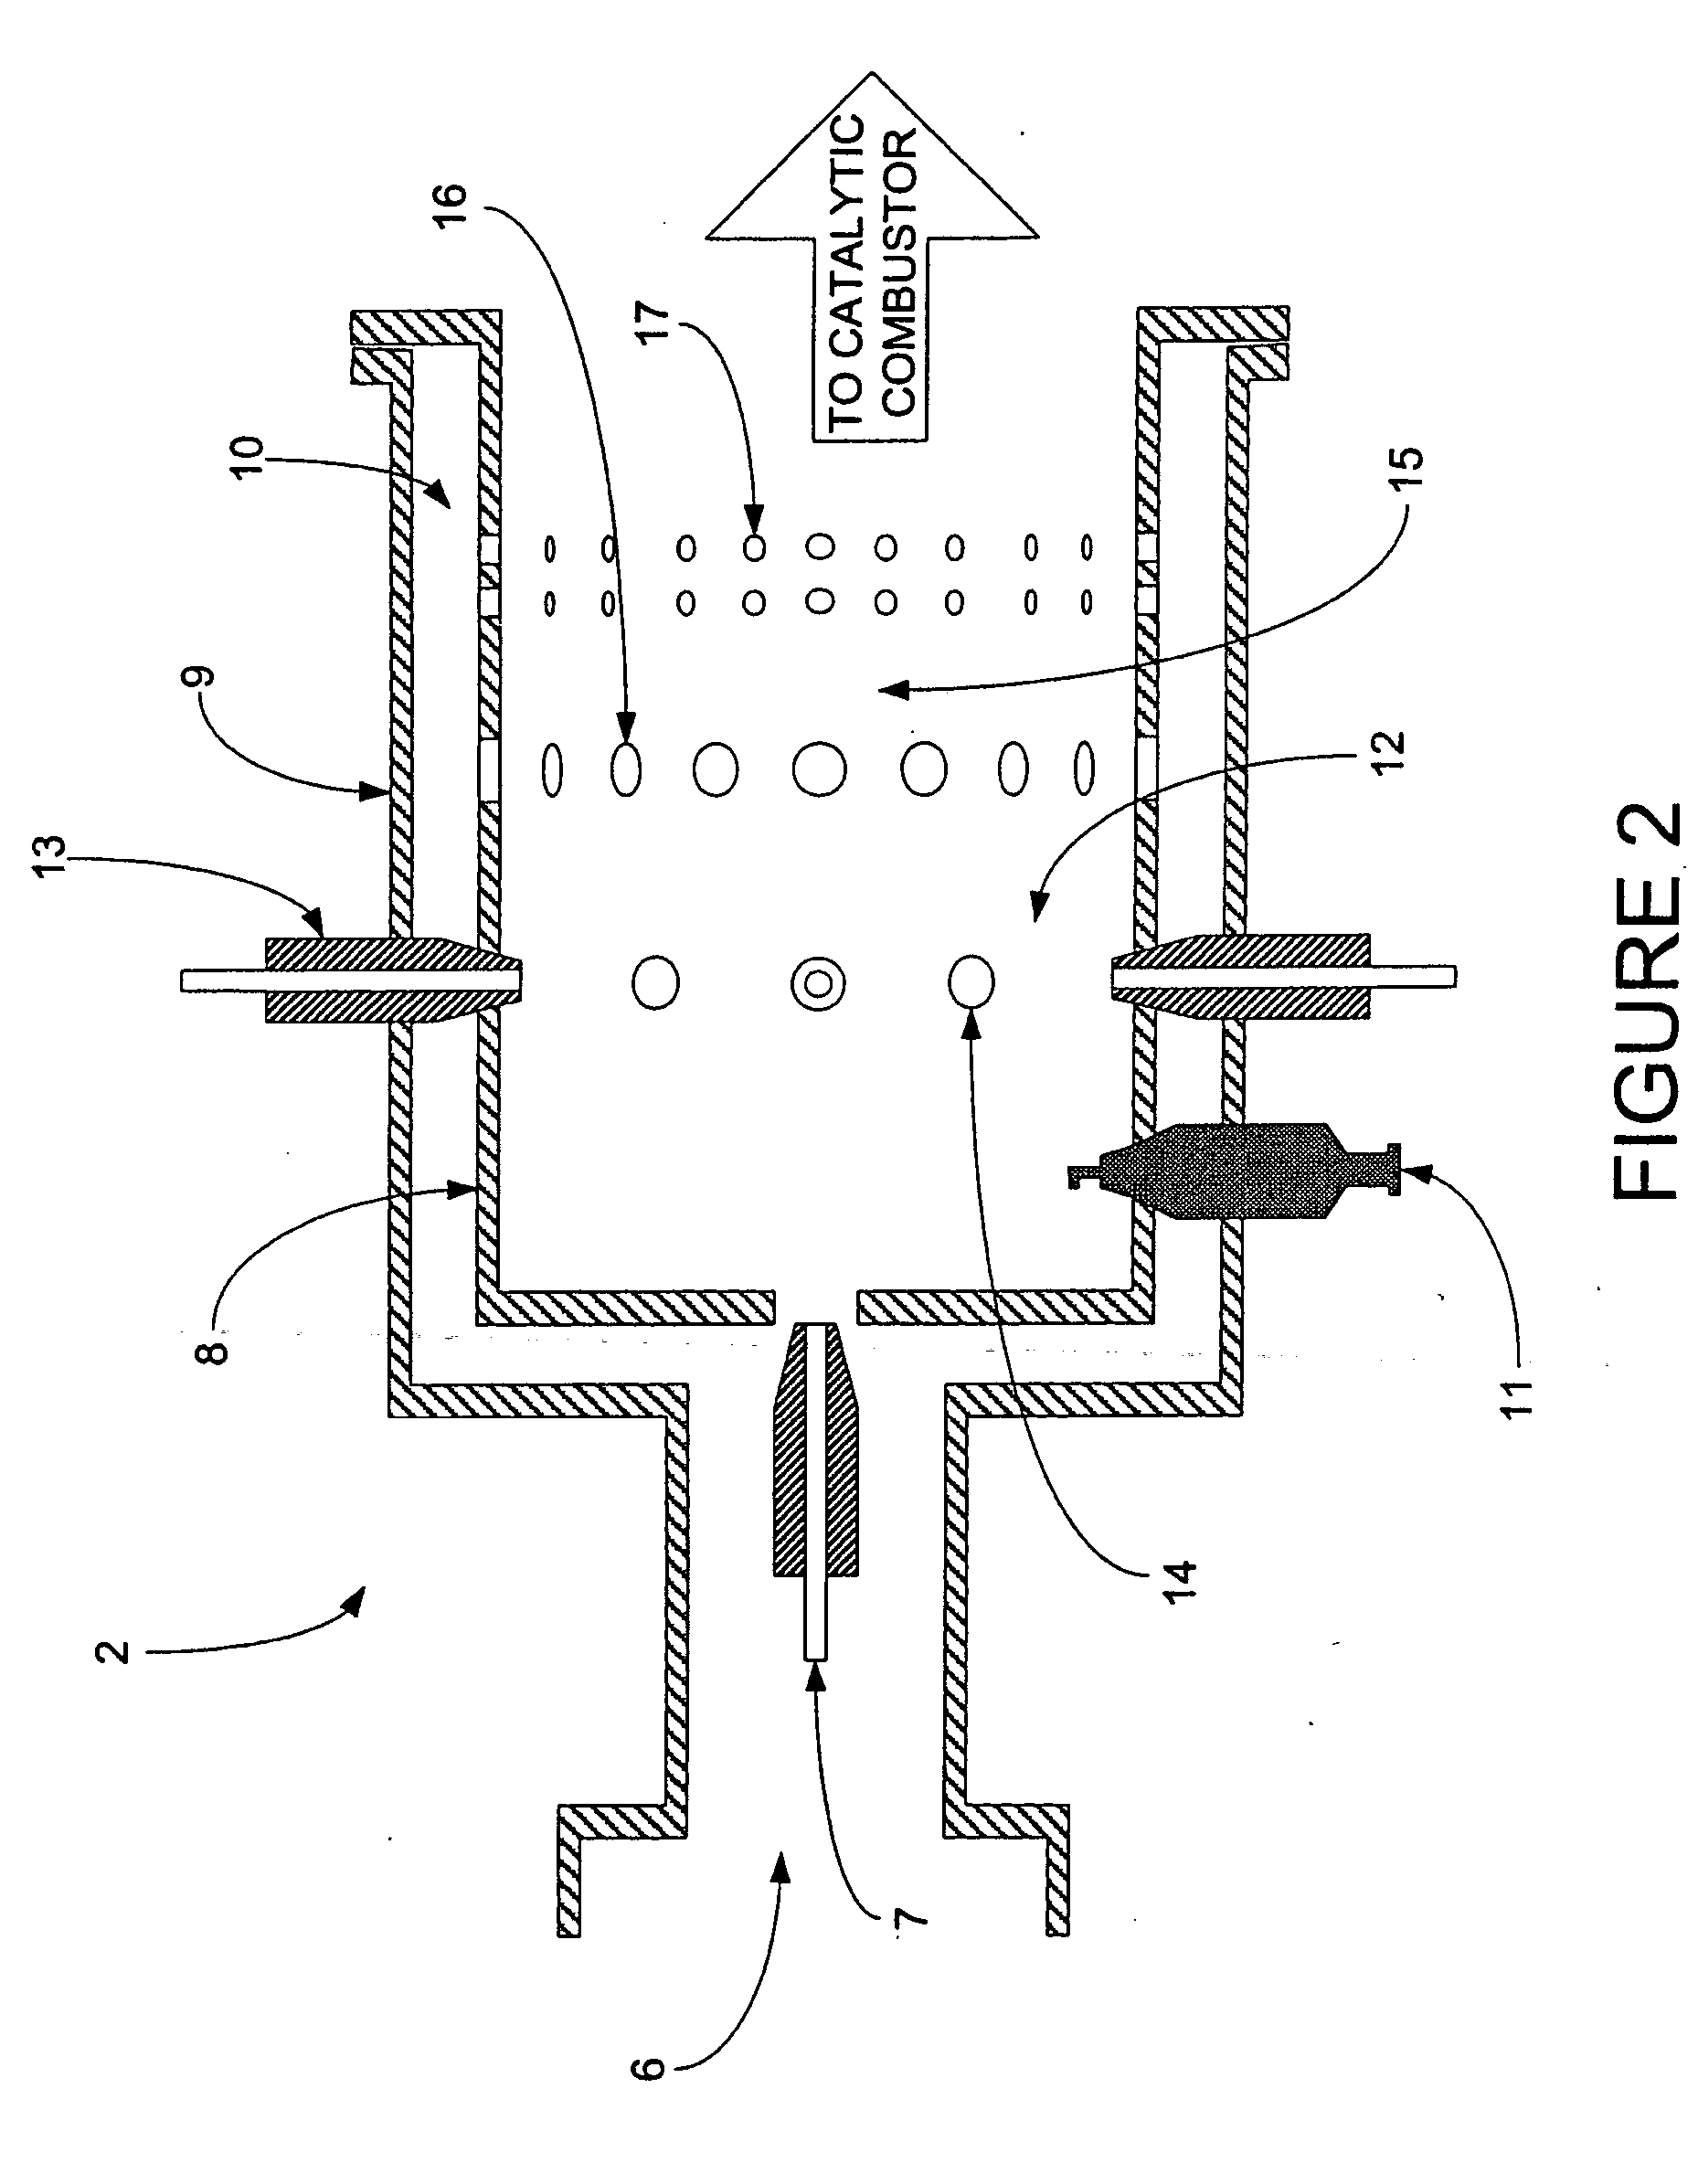 Integrated fuel processor subsystem with quasi-autothermal reforming